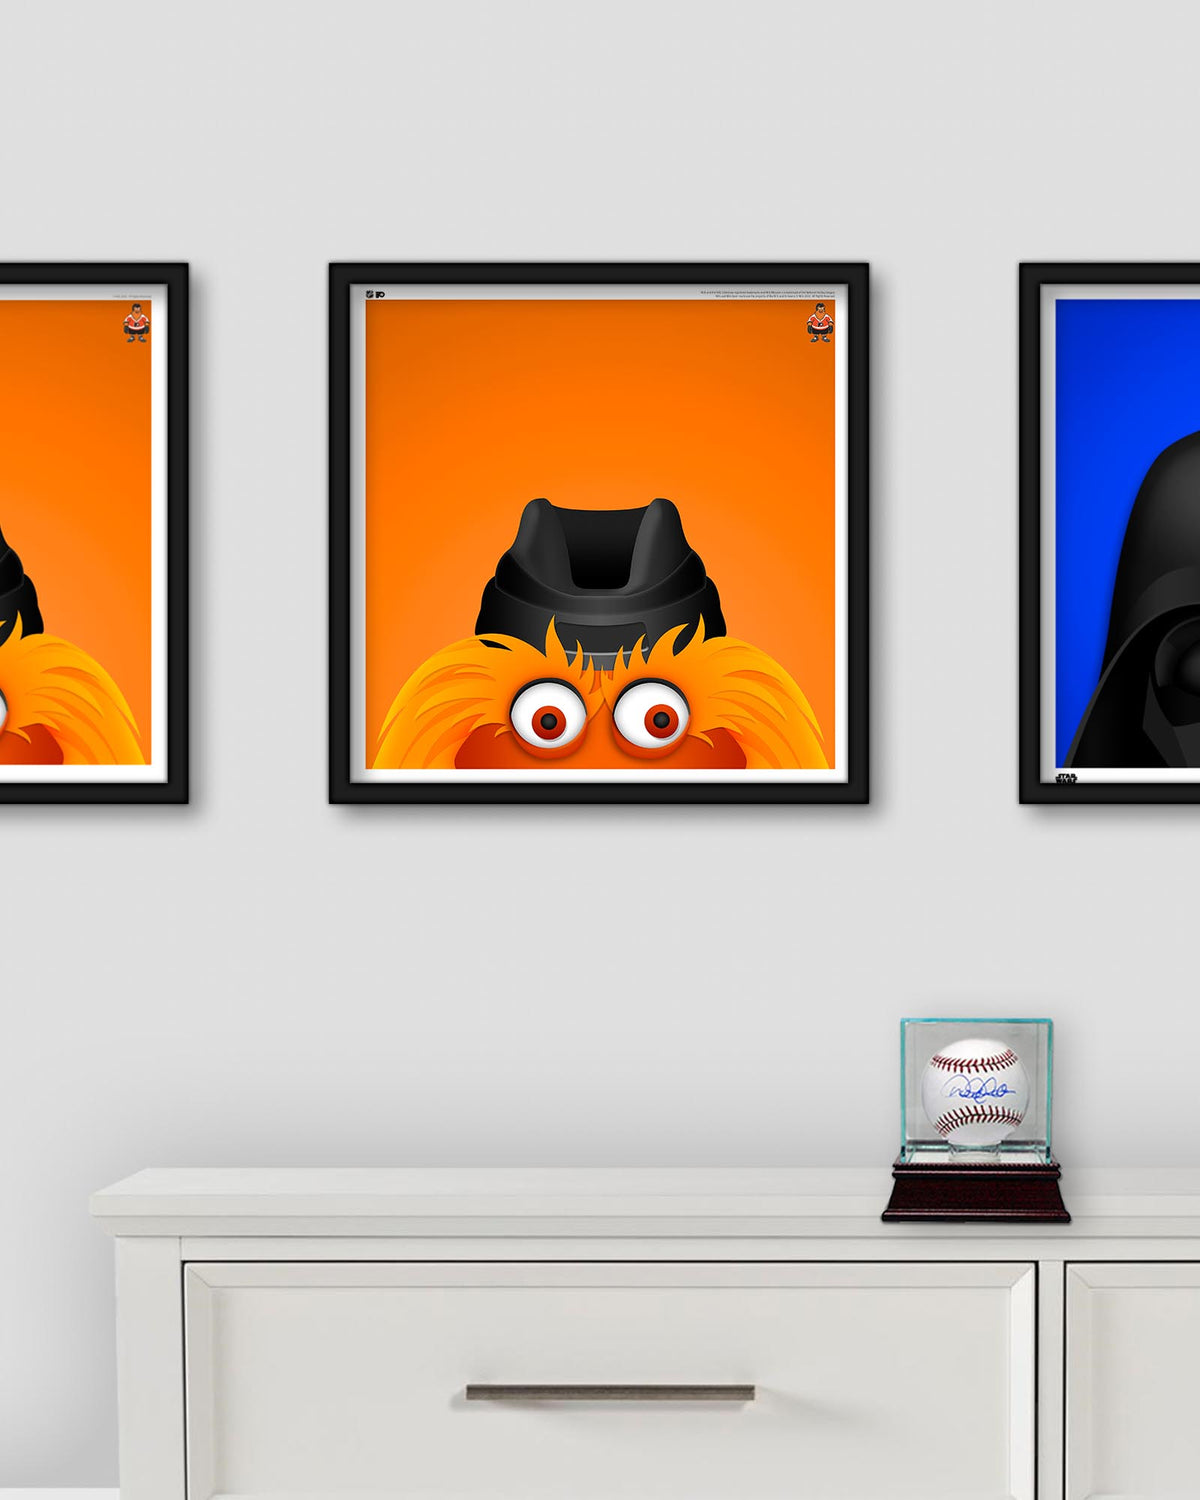 Minimalist Gritty Square Poster Print